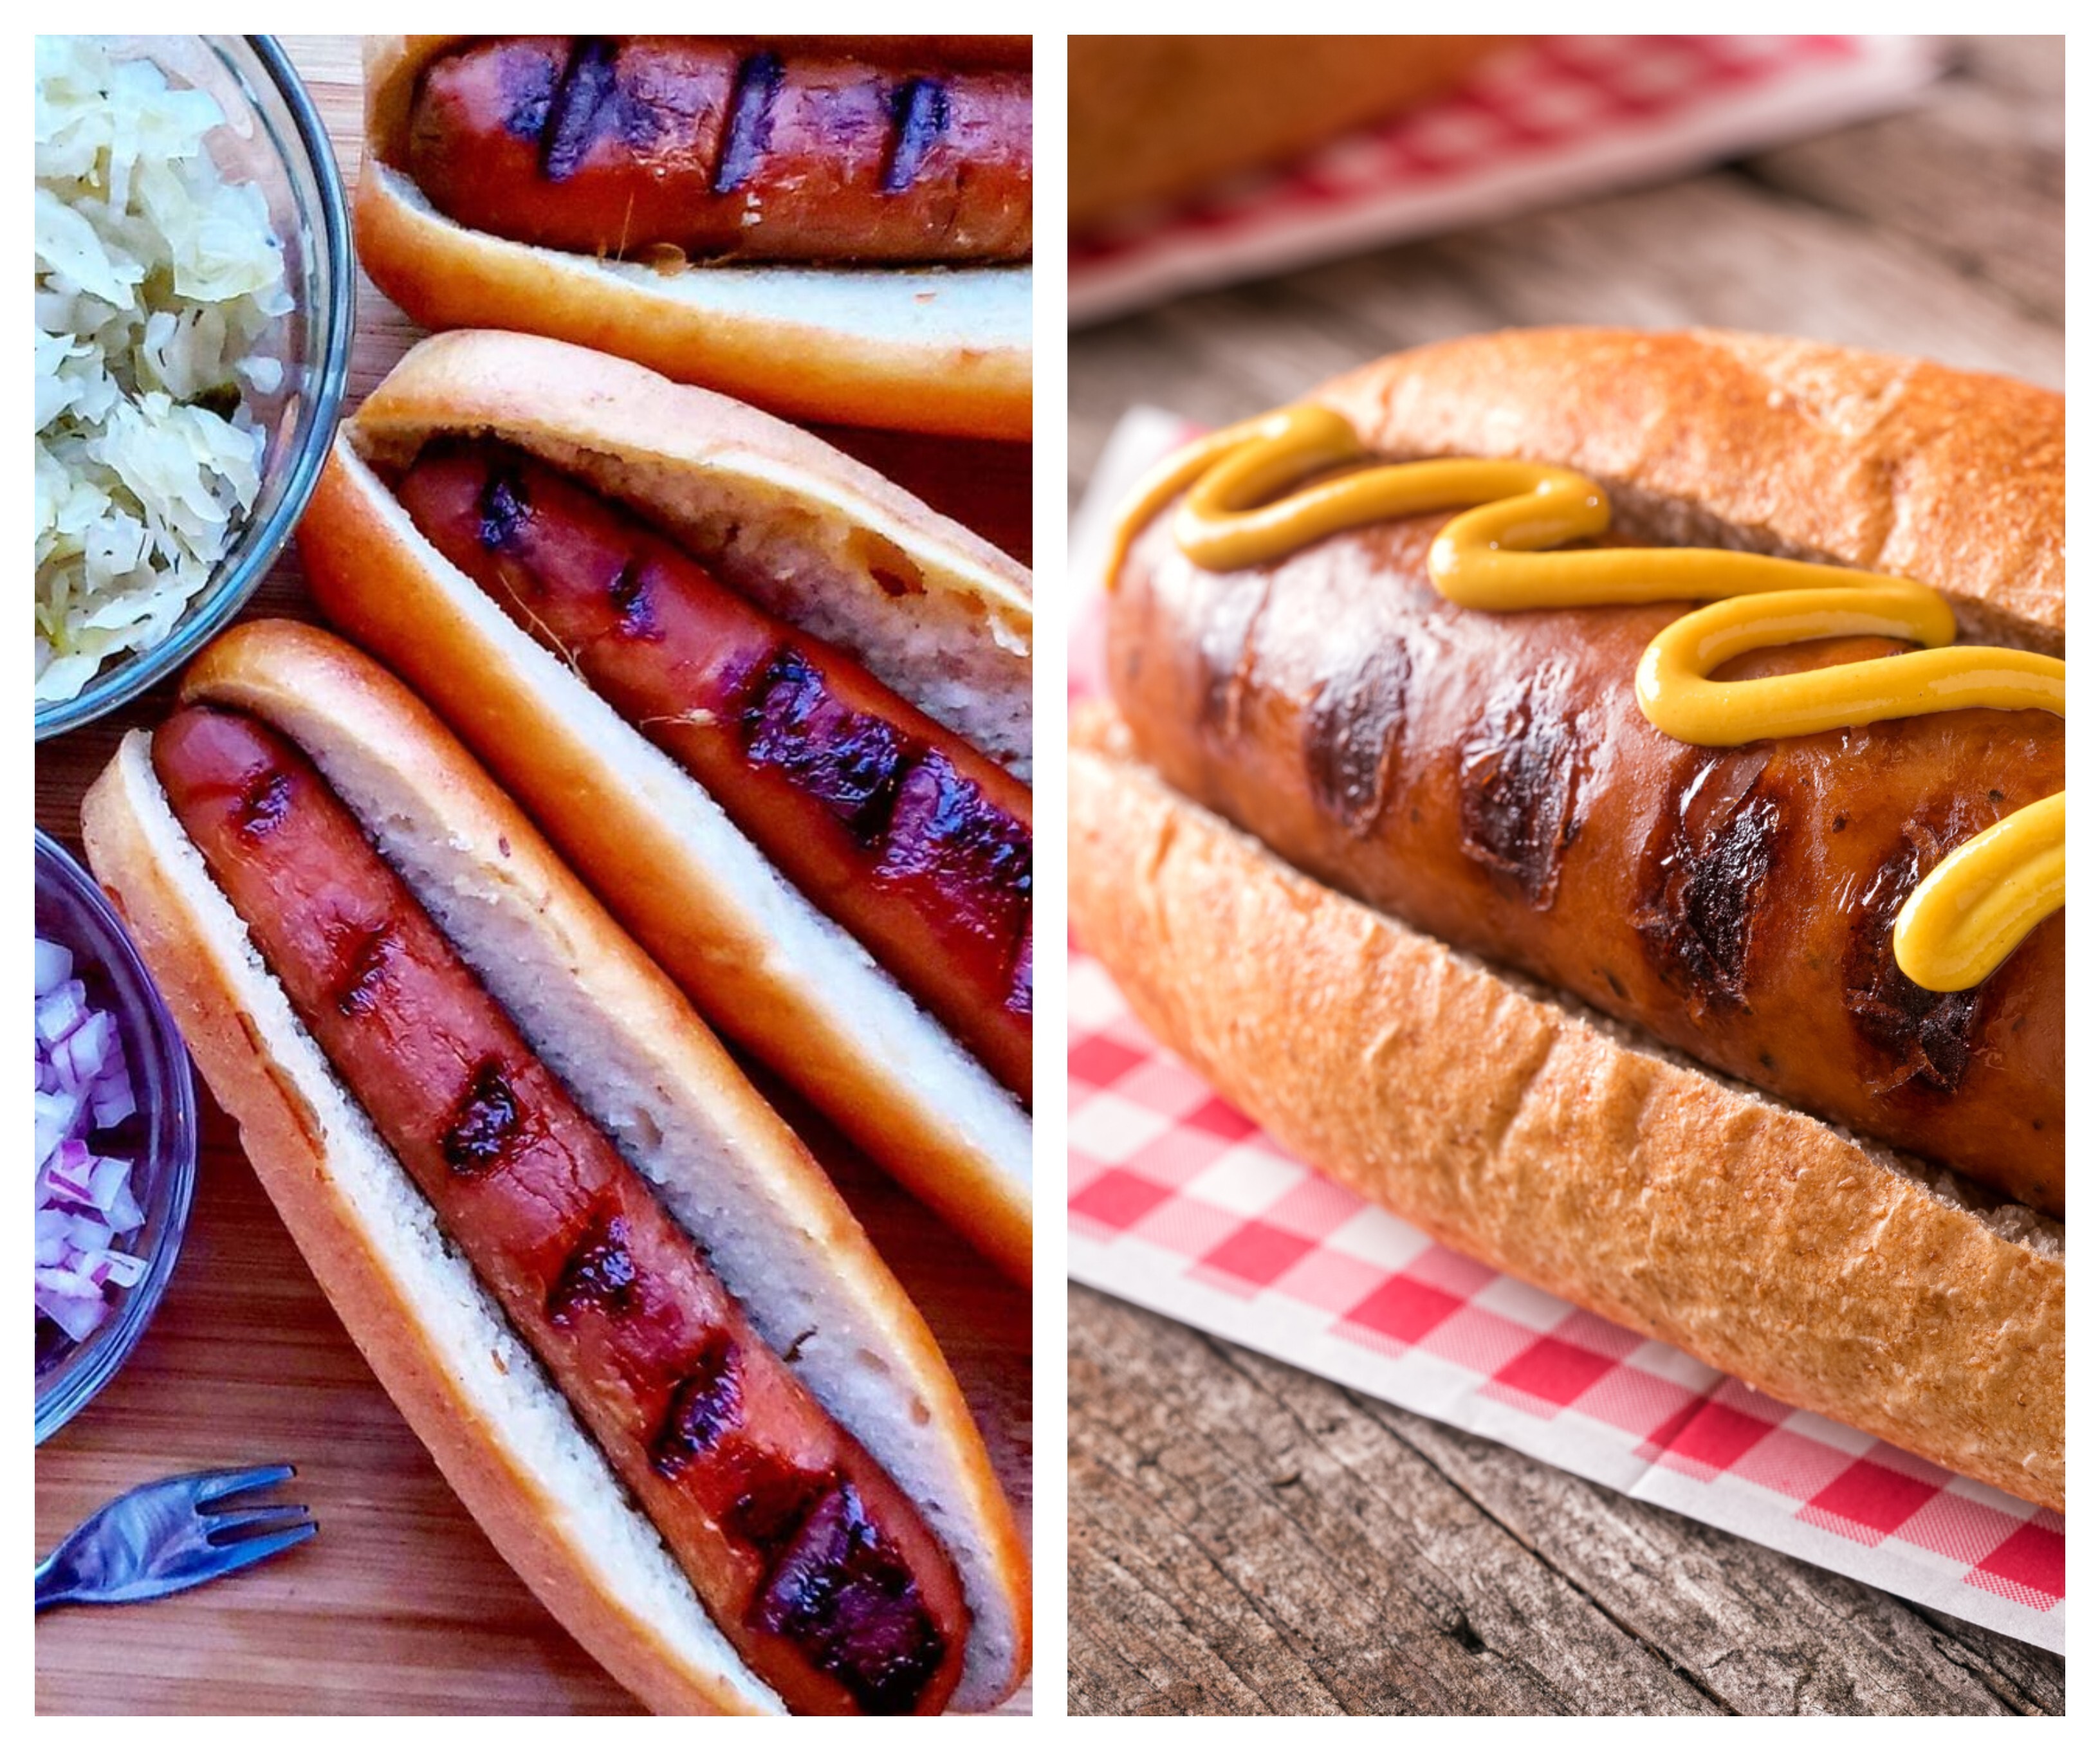 Carrotdog vs hot dog – can you tell the difference? Photos: @knappasaurus_veg/Instagram, Getty Images